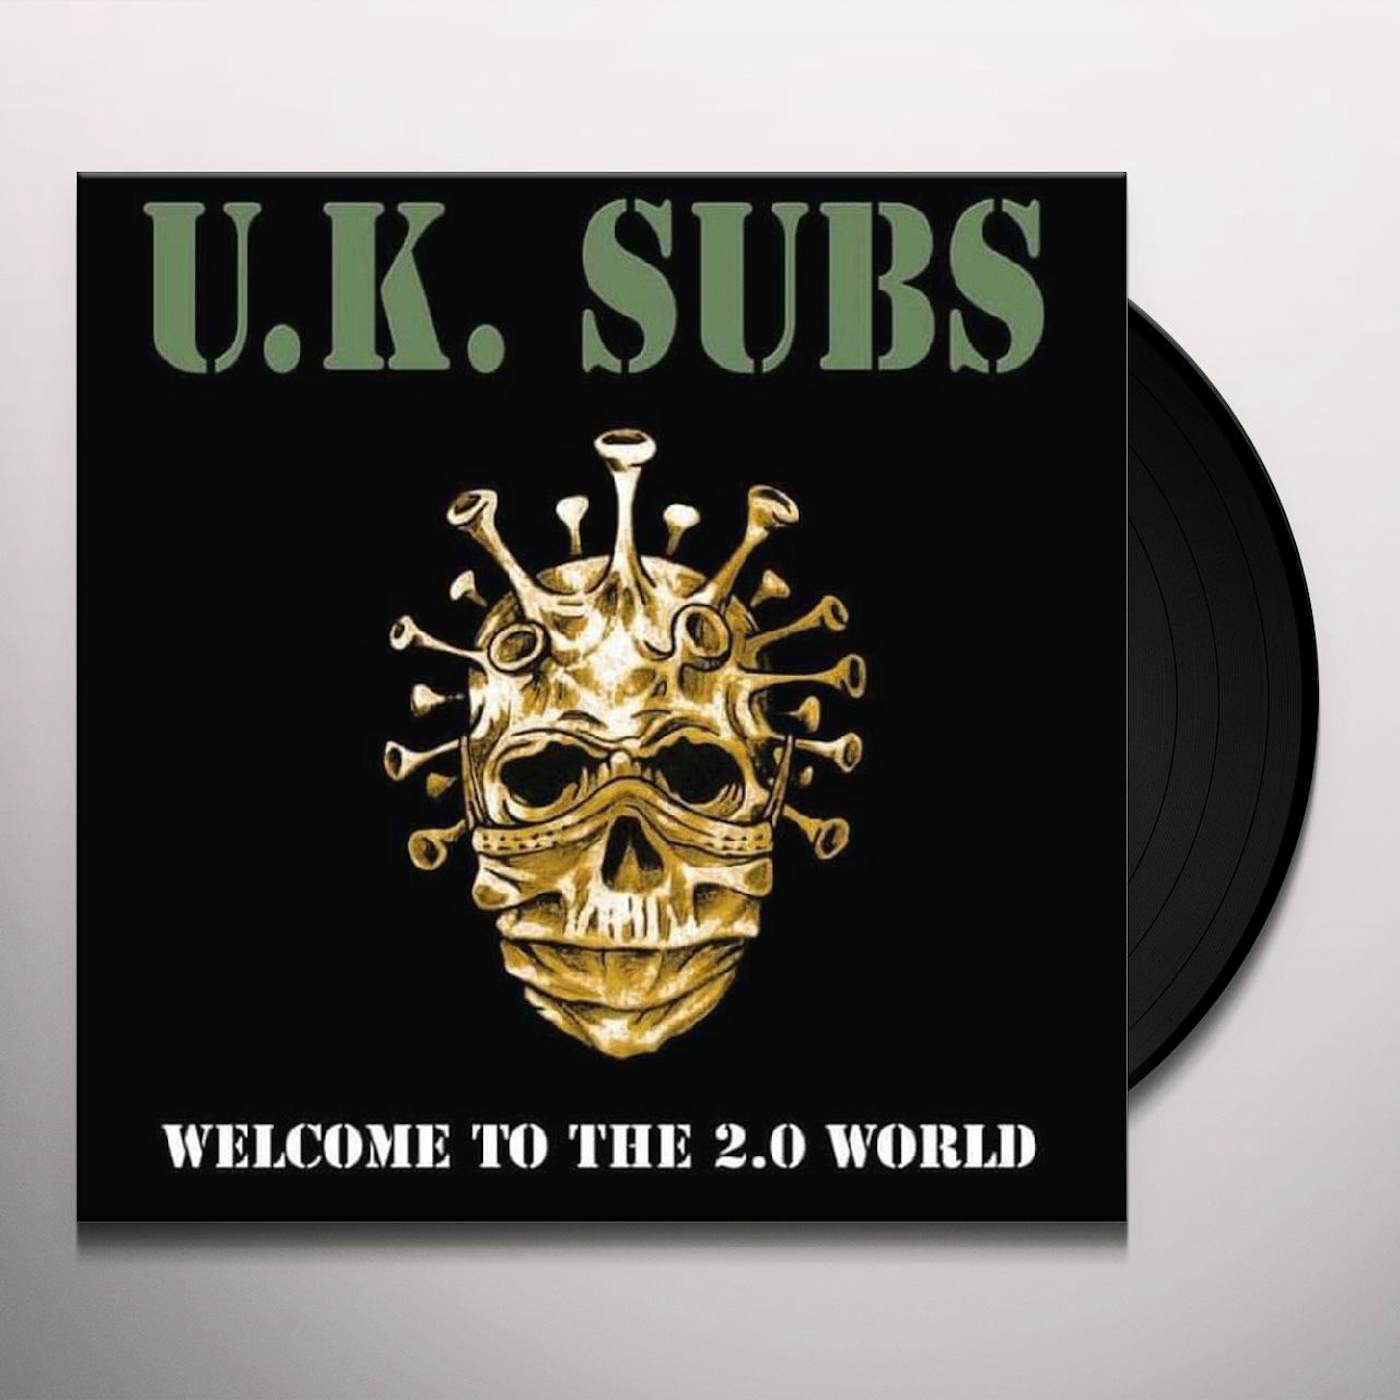 U.K. Subs WELCOME TO THE 2.0 WORLD Vinyl Record